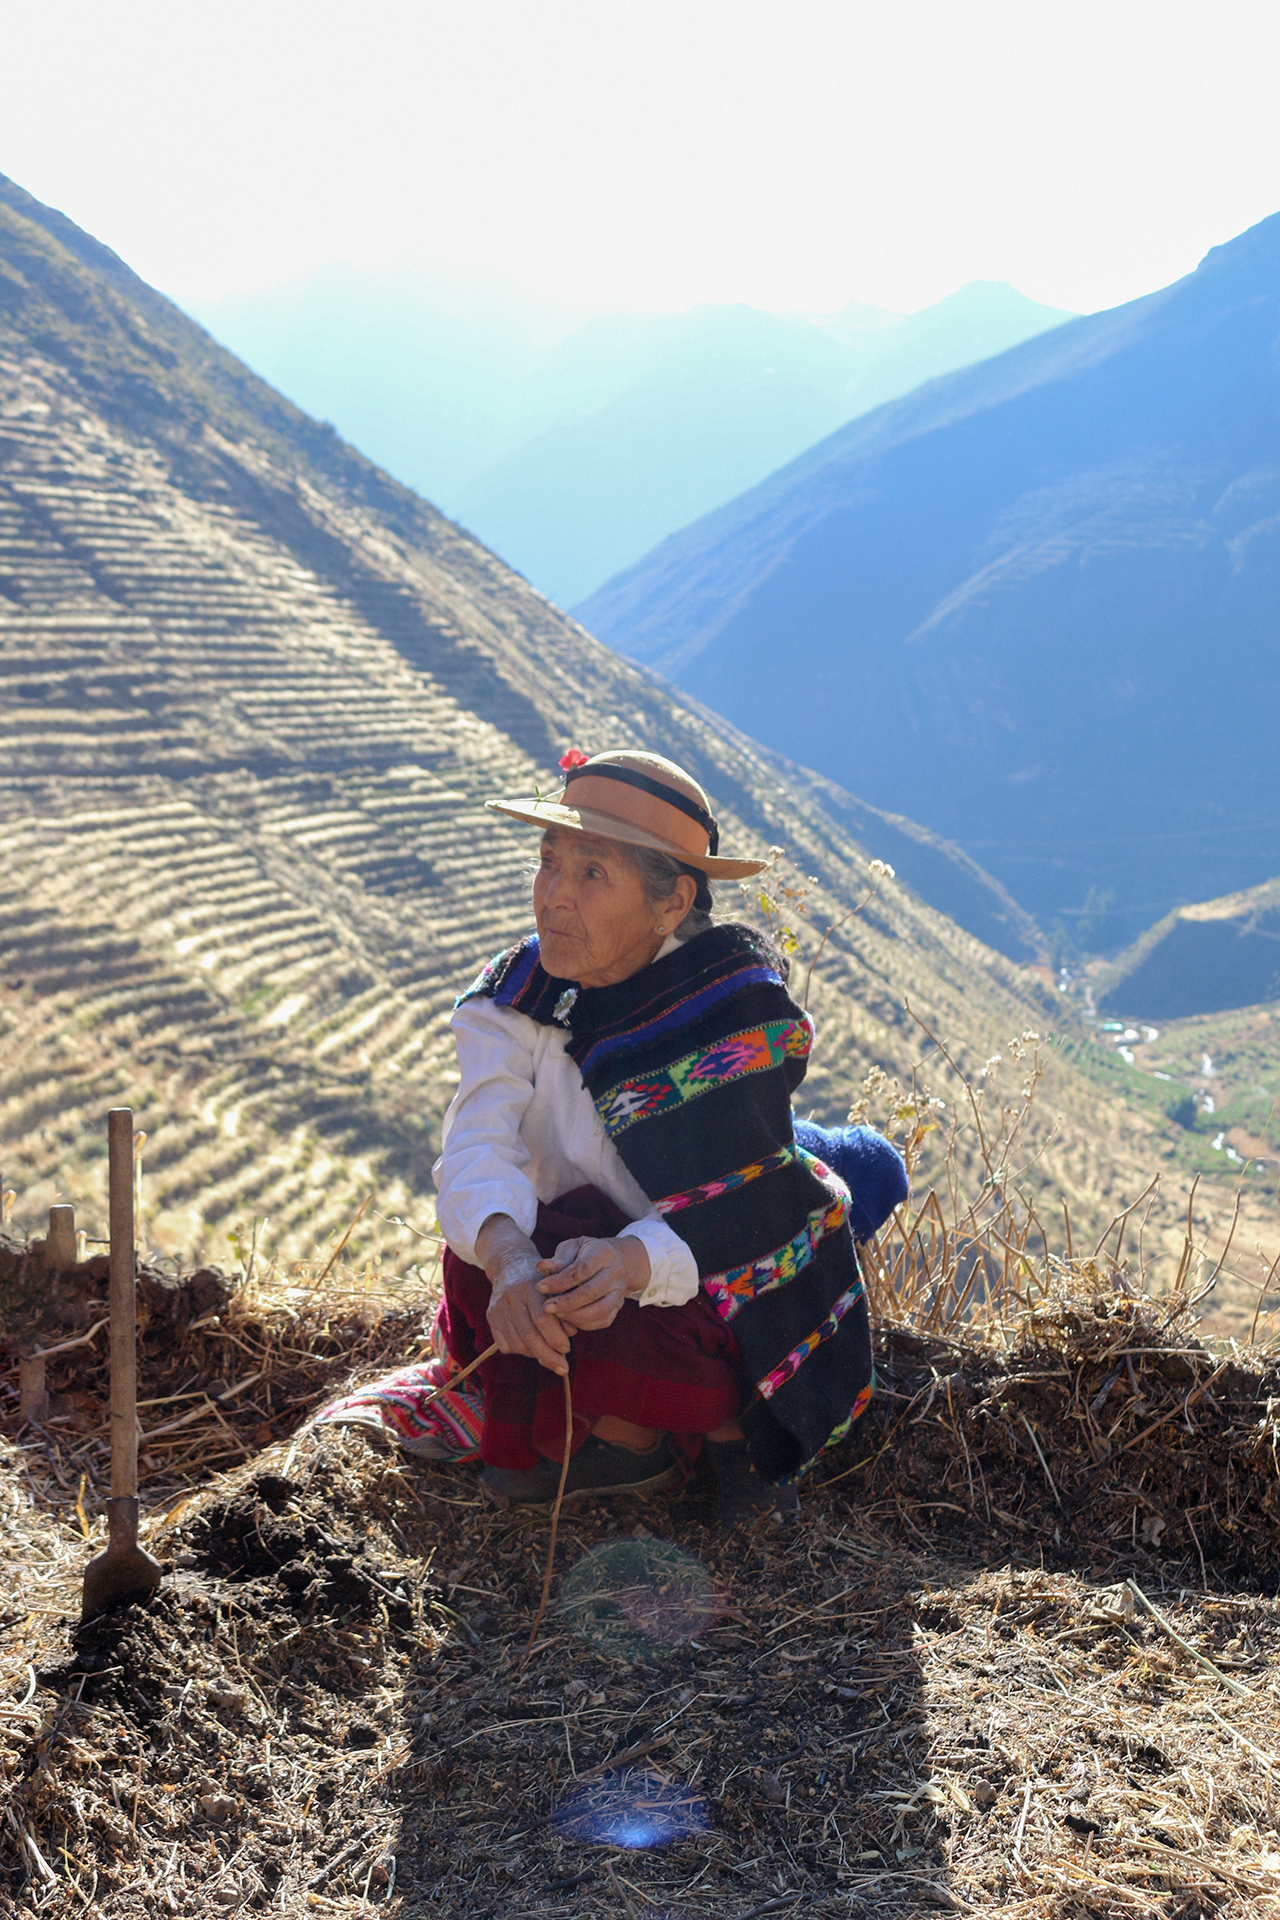 Andean woman preparing the land to plant the potatoes in Laraos, Peru.